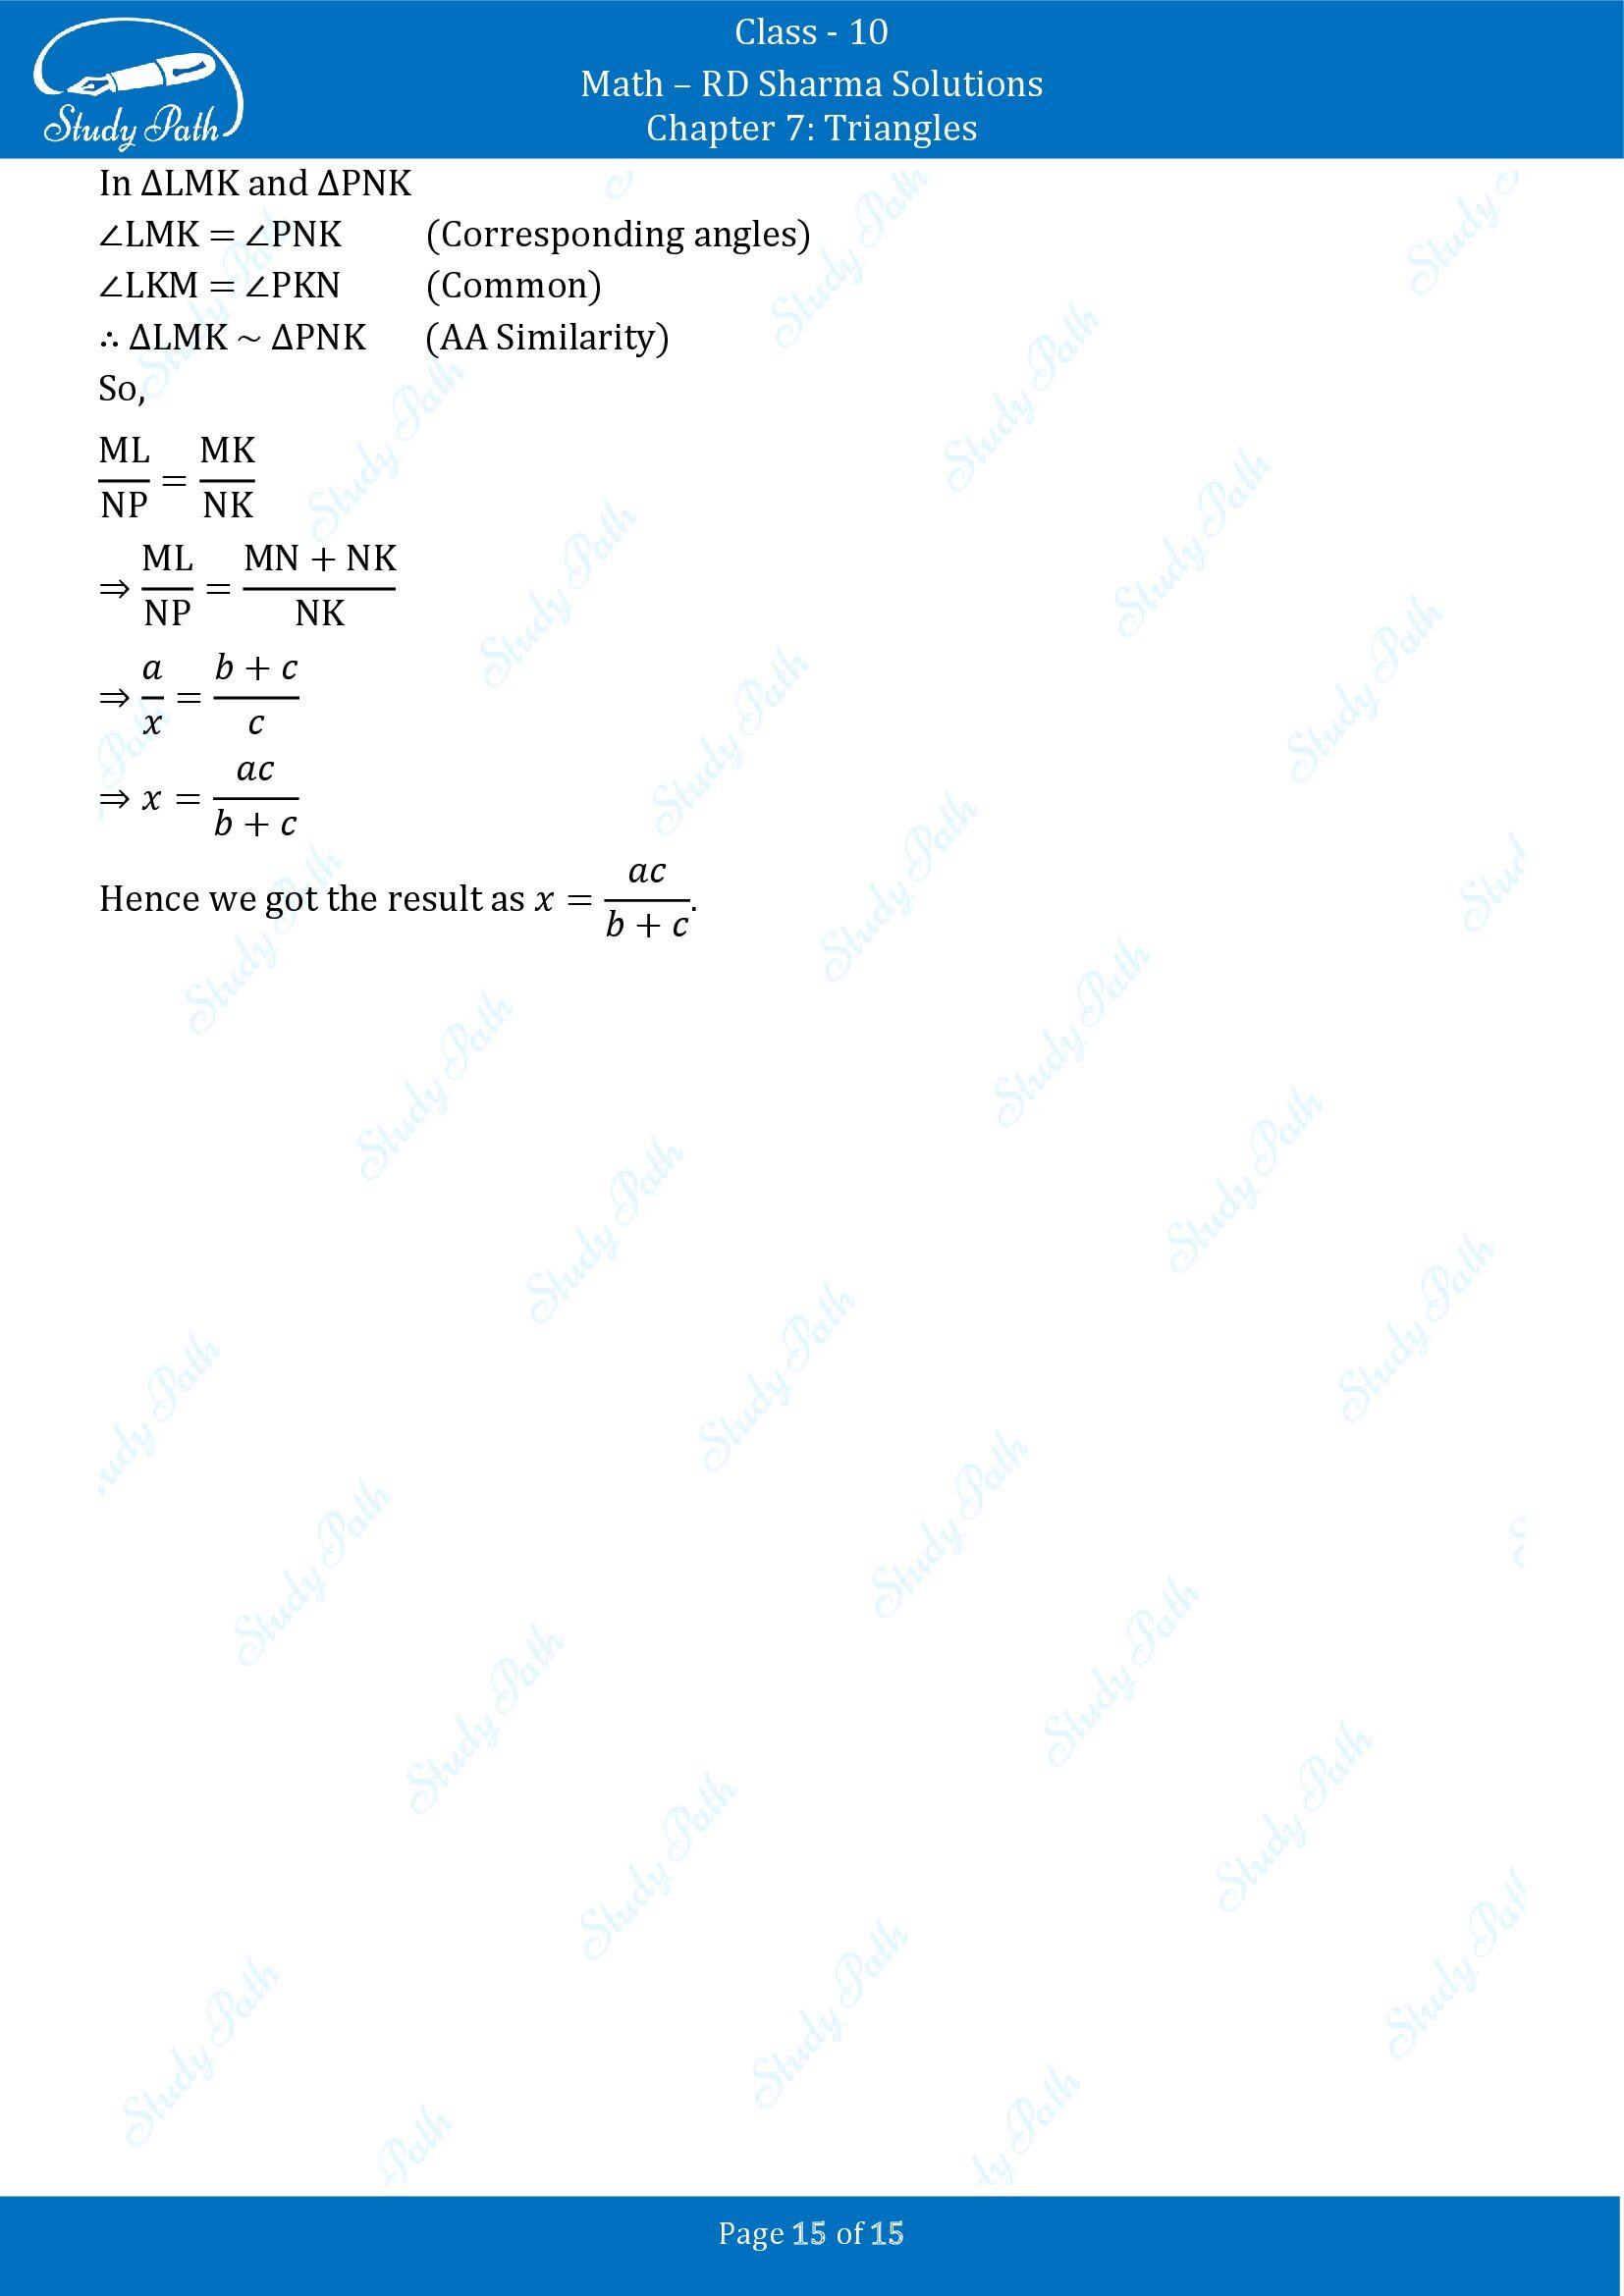 RD Sharma Solutions Class 10 Chapter 7 Triangles Very Short Answer Type Questions VSAQs 00015